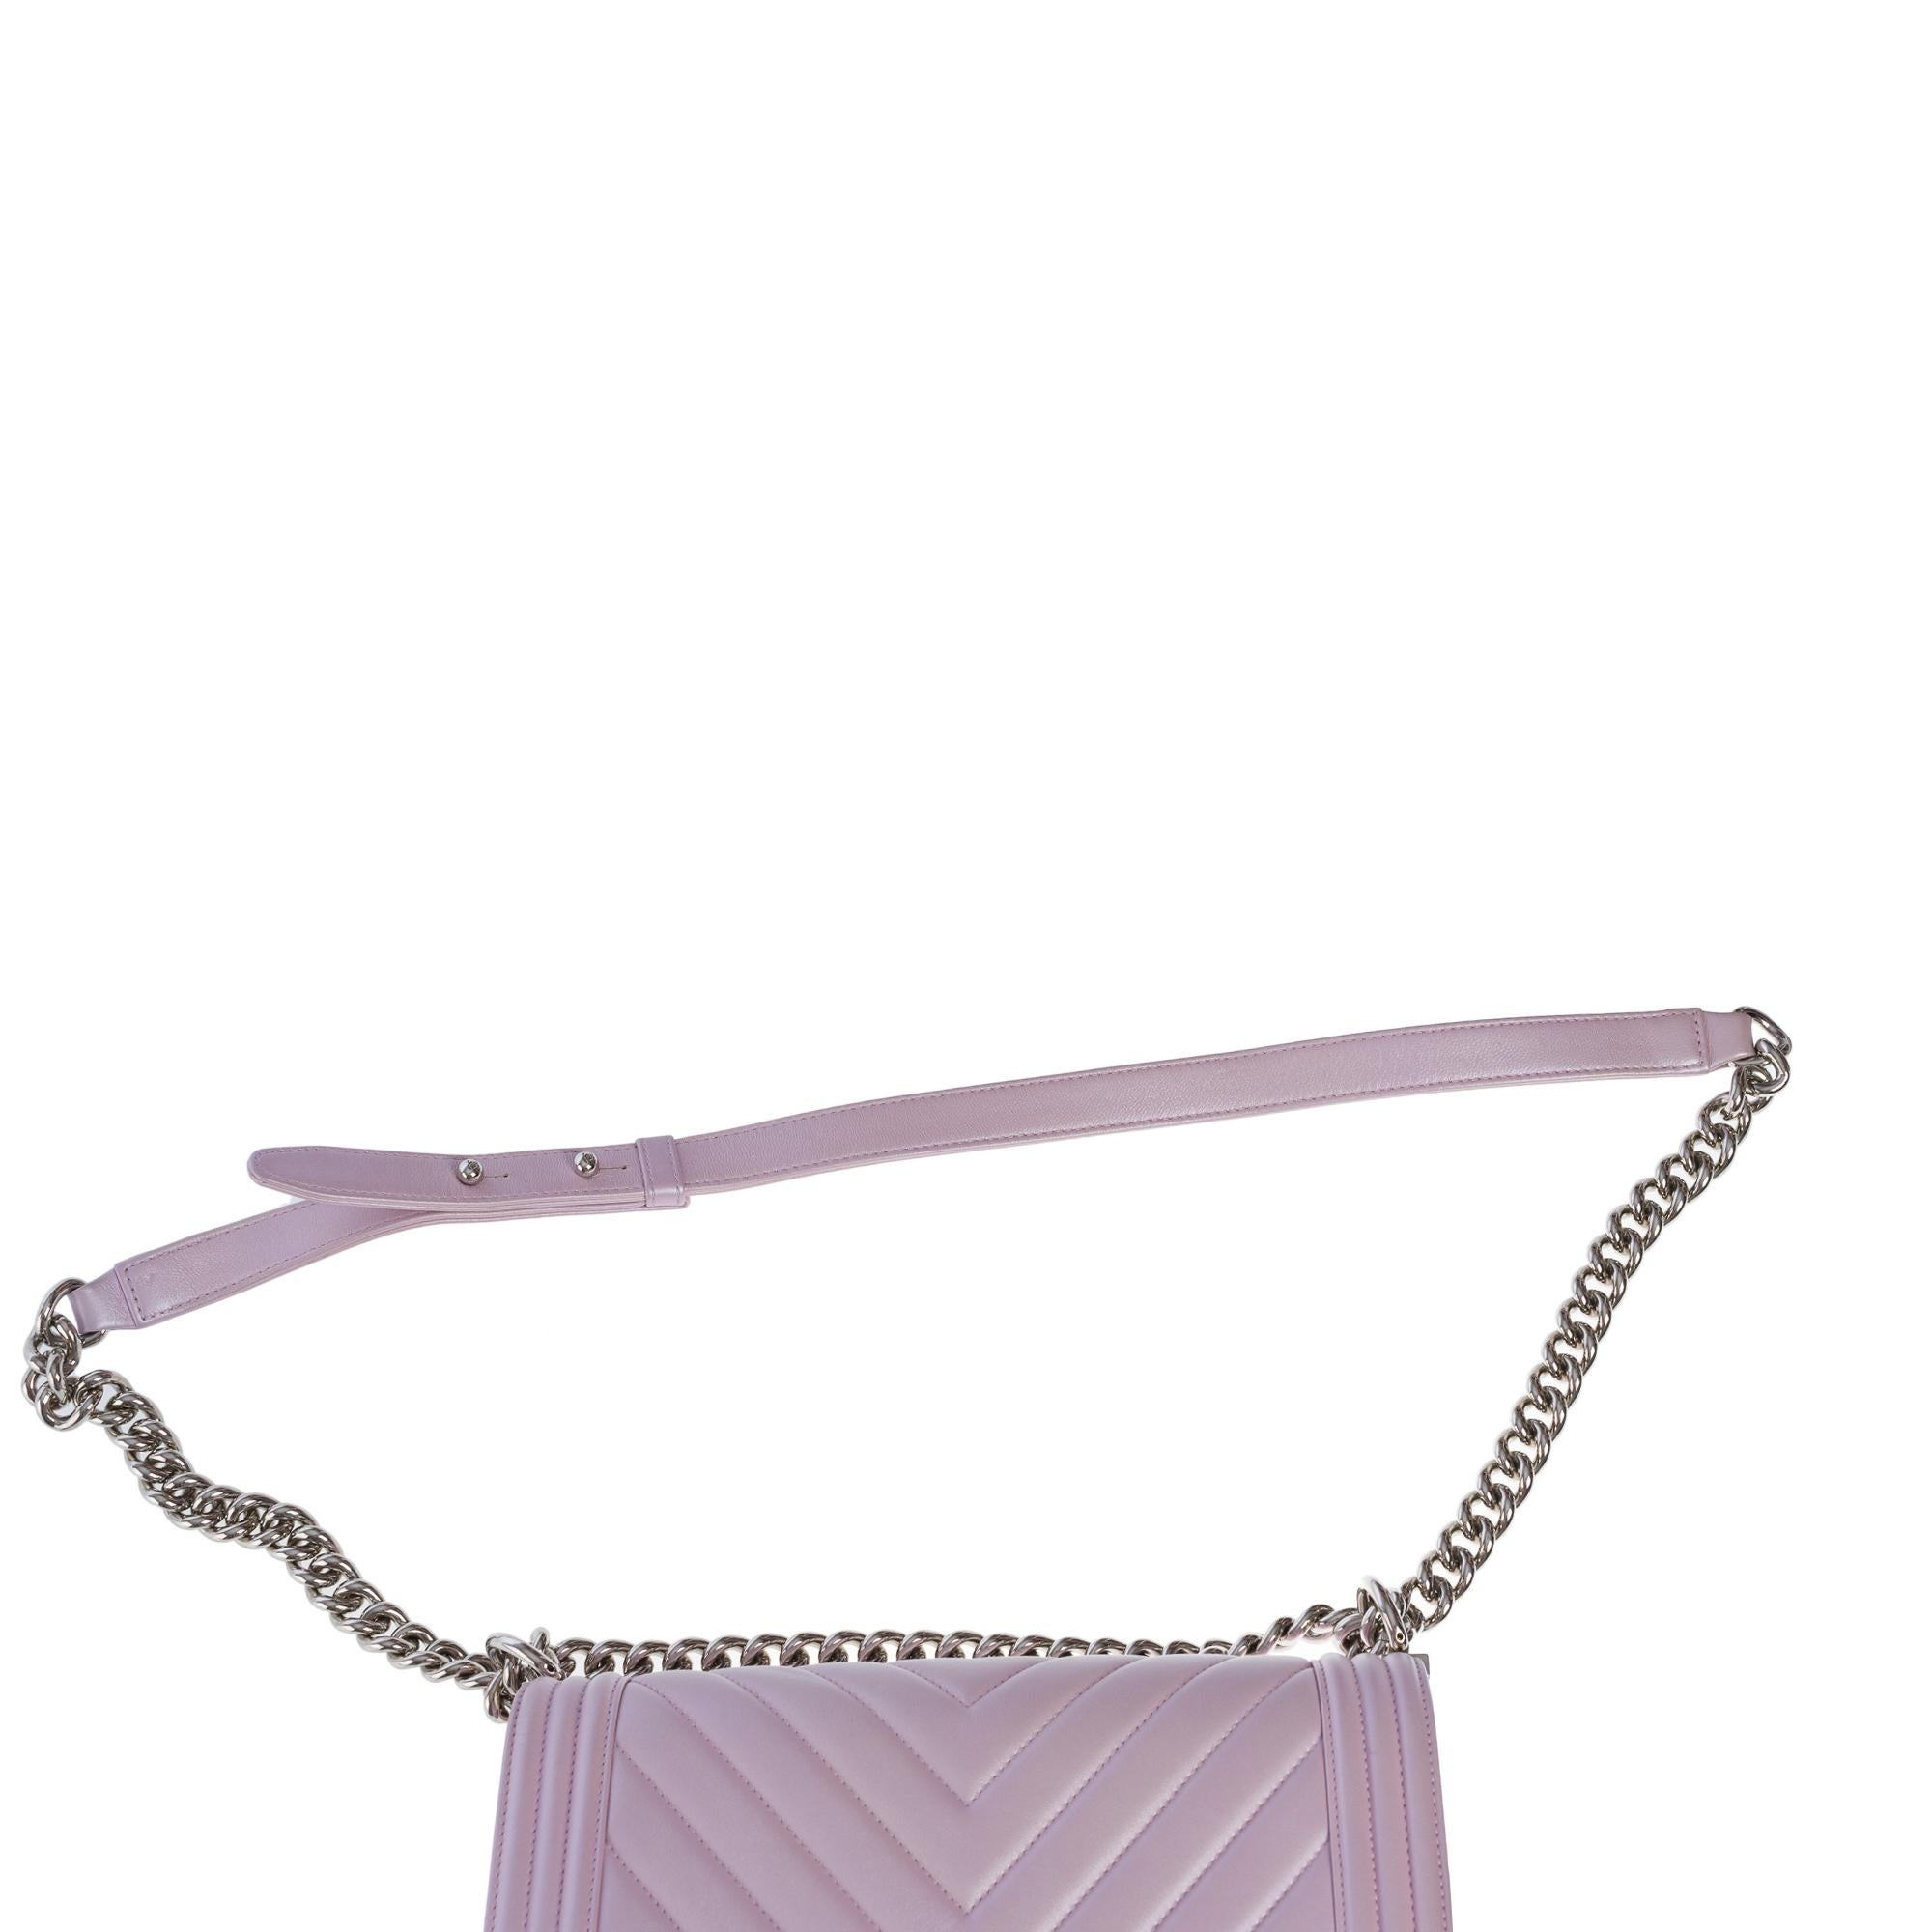 Chanel Boy Old Medium shoulder bag in lilac quilted herringbone leather, SHW For Sale 2